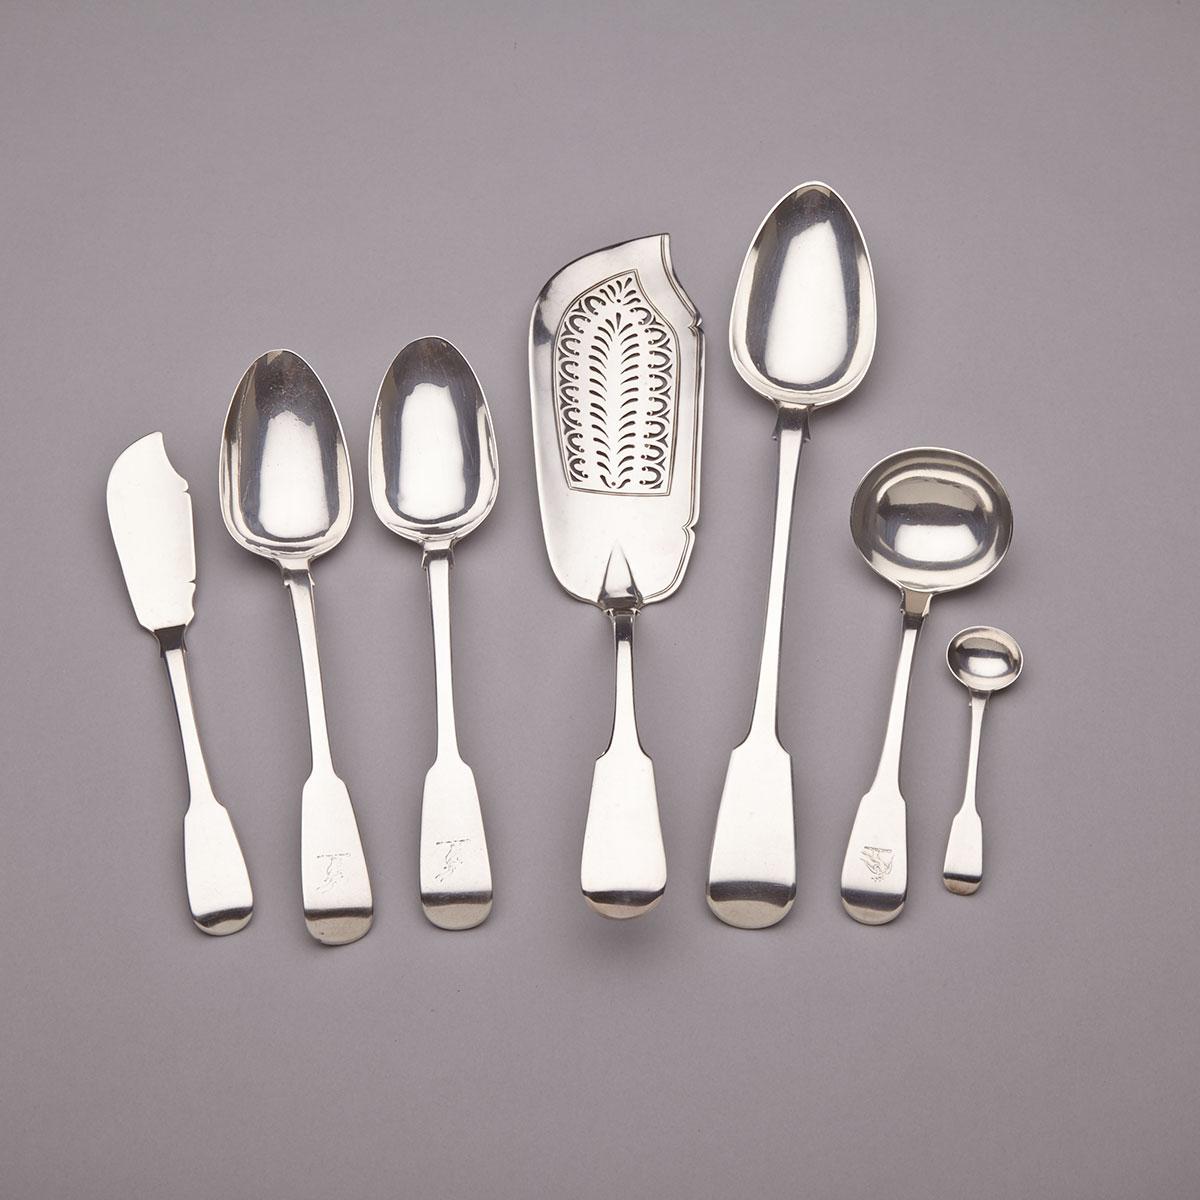 Georgian Silver Fiddle Pattern Fish Slice, Basting Spoon, Gravy Ladle, Butter Knife, Salt Spoon and Pair of Table Spoons, various makers, London and Dublin, c.1818-37